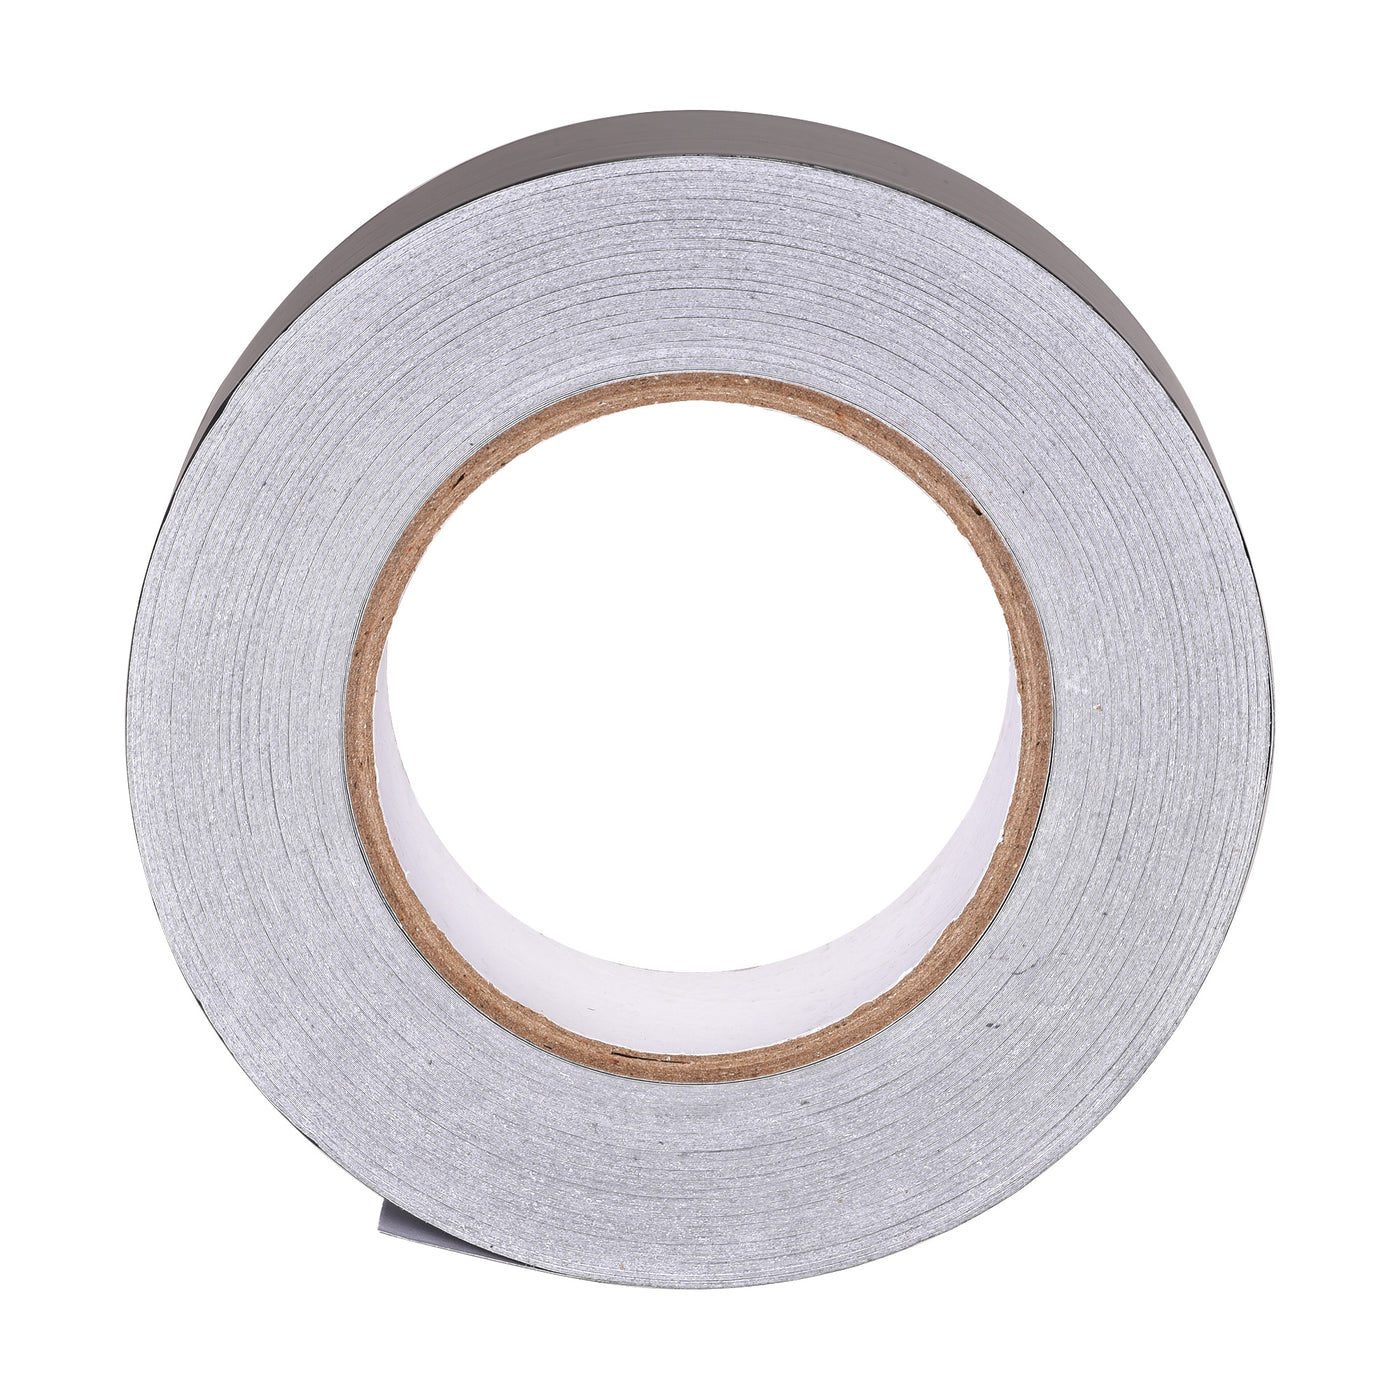 uxcell Uxcell 35mm Aluminum Foil Tape for HVAC, Patching Hot and Blocking light 50m/164ft